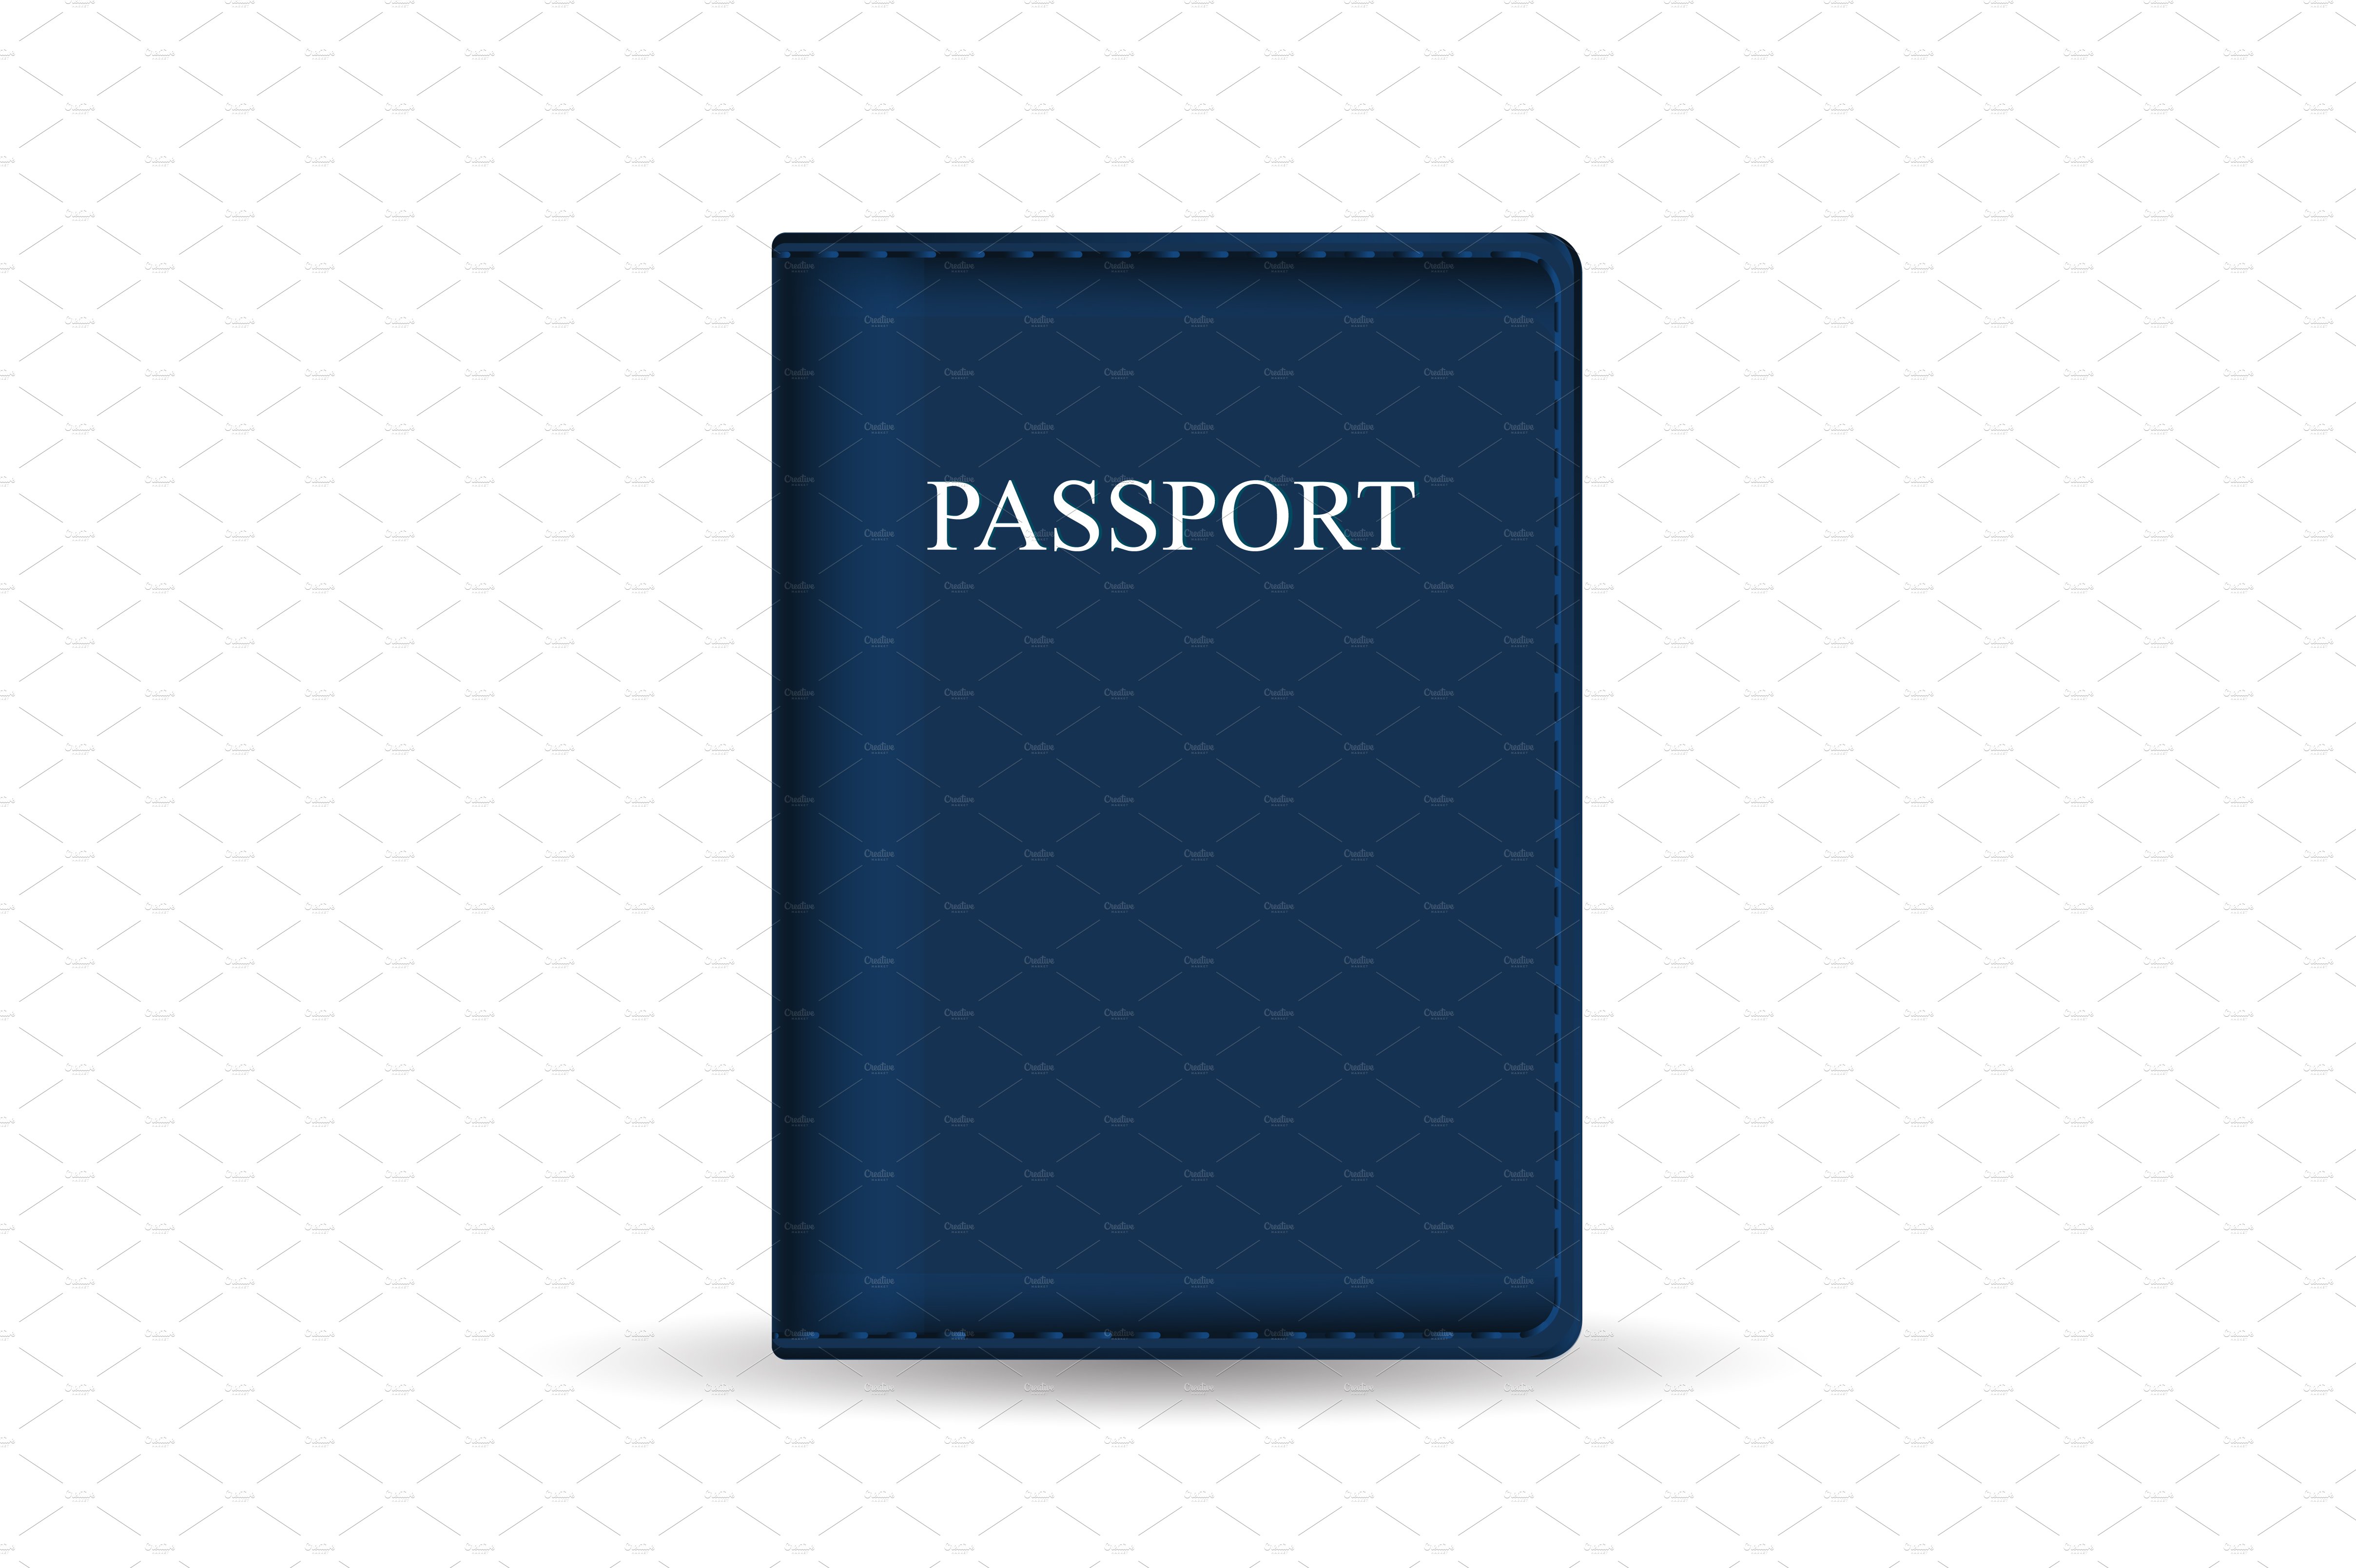 Passport cover isolated cover image.